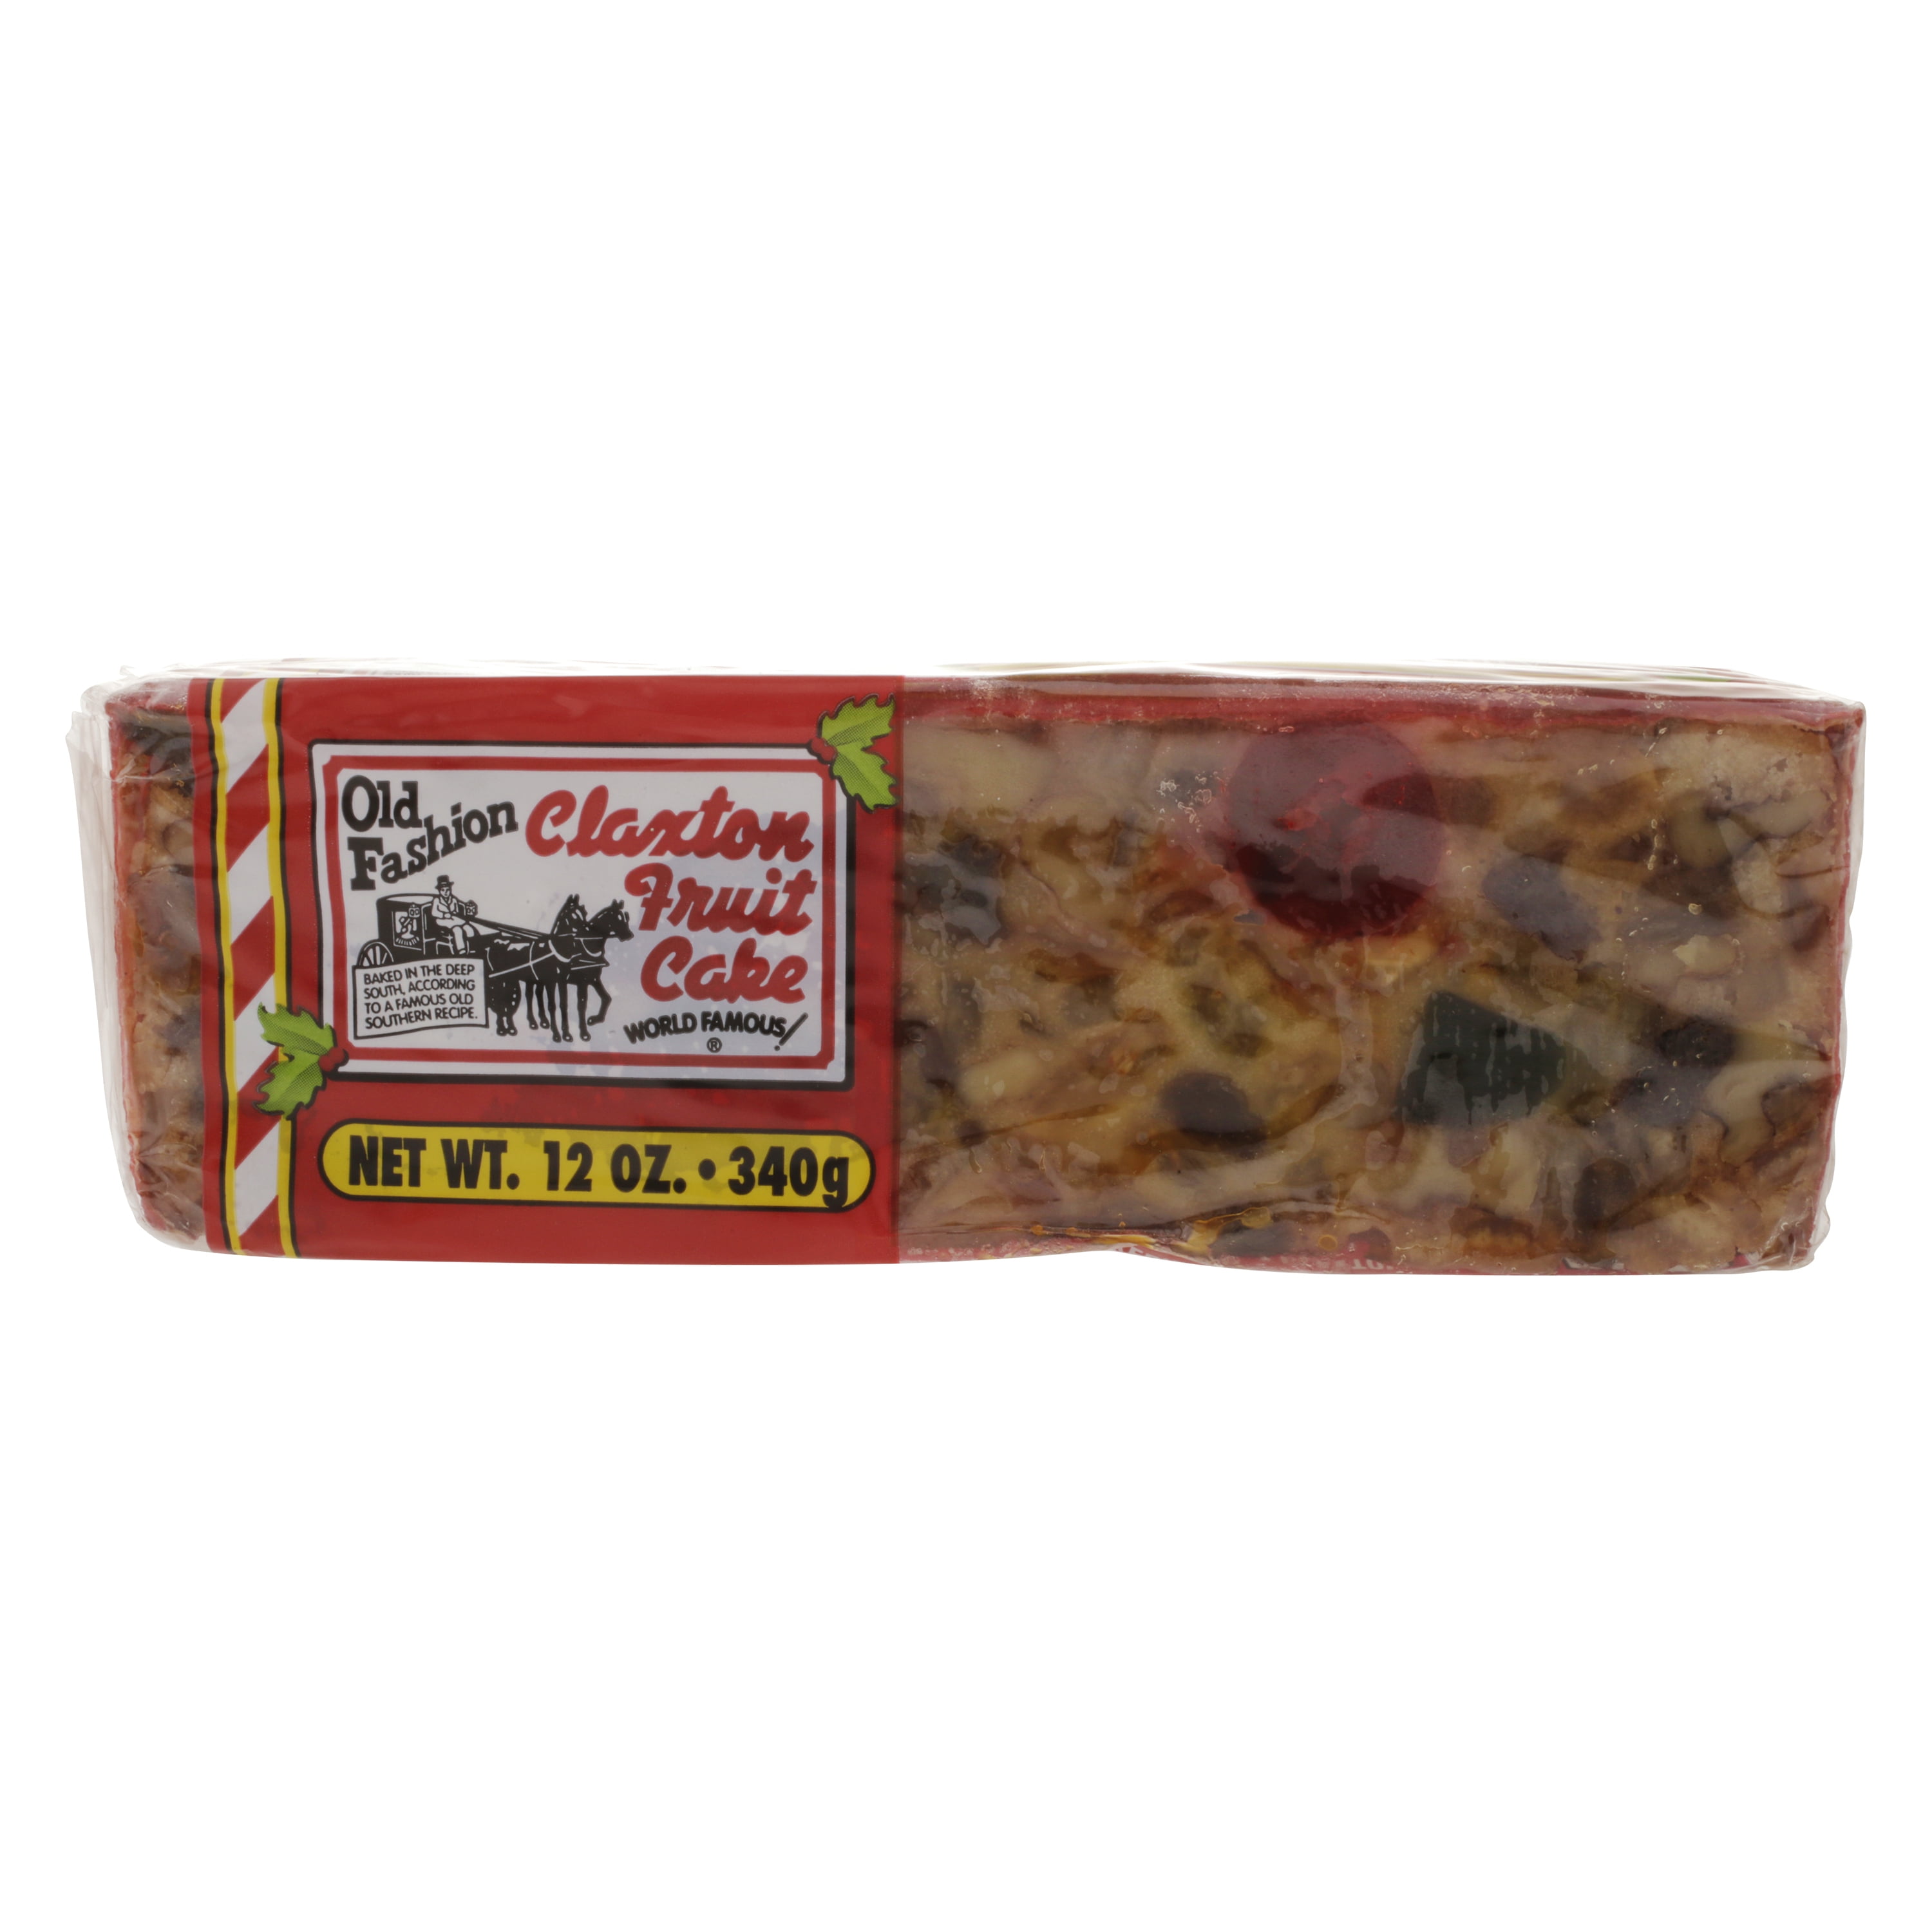 Claxton Fruit Cake Regular-dark Sampler Pack Over 70 Choice Fruits and Nuts  for sale online | eBay